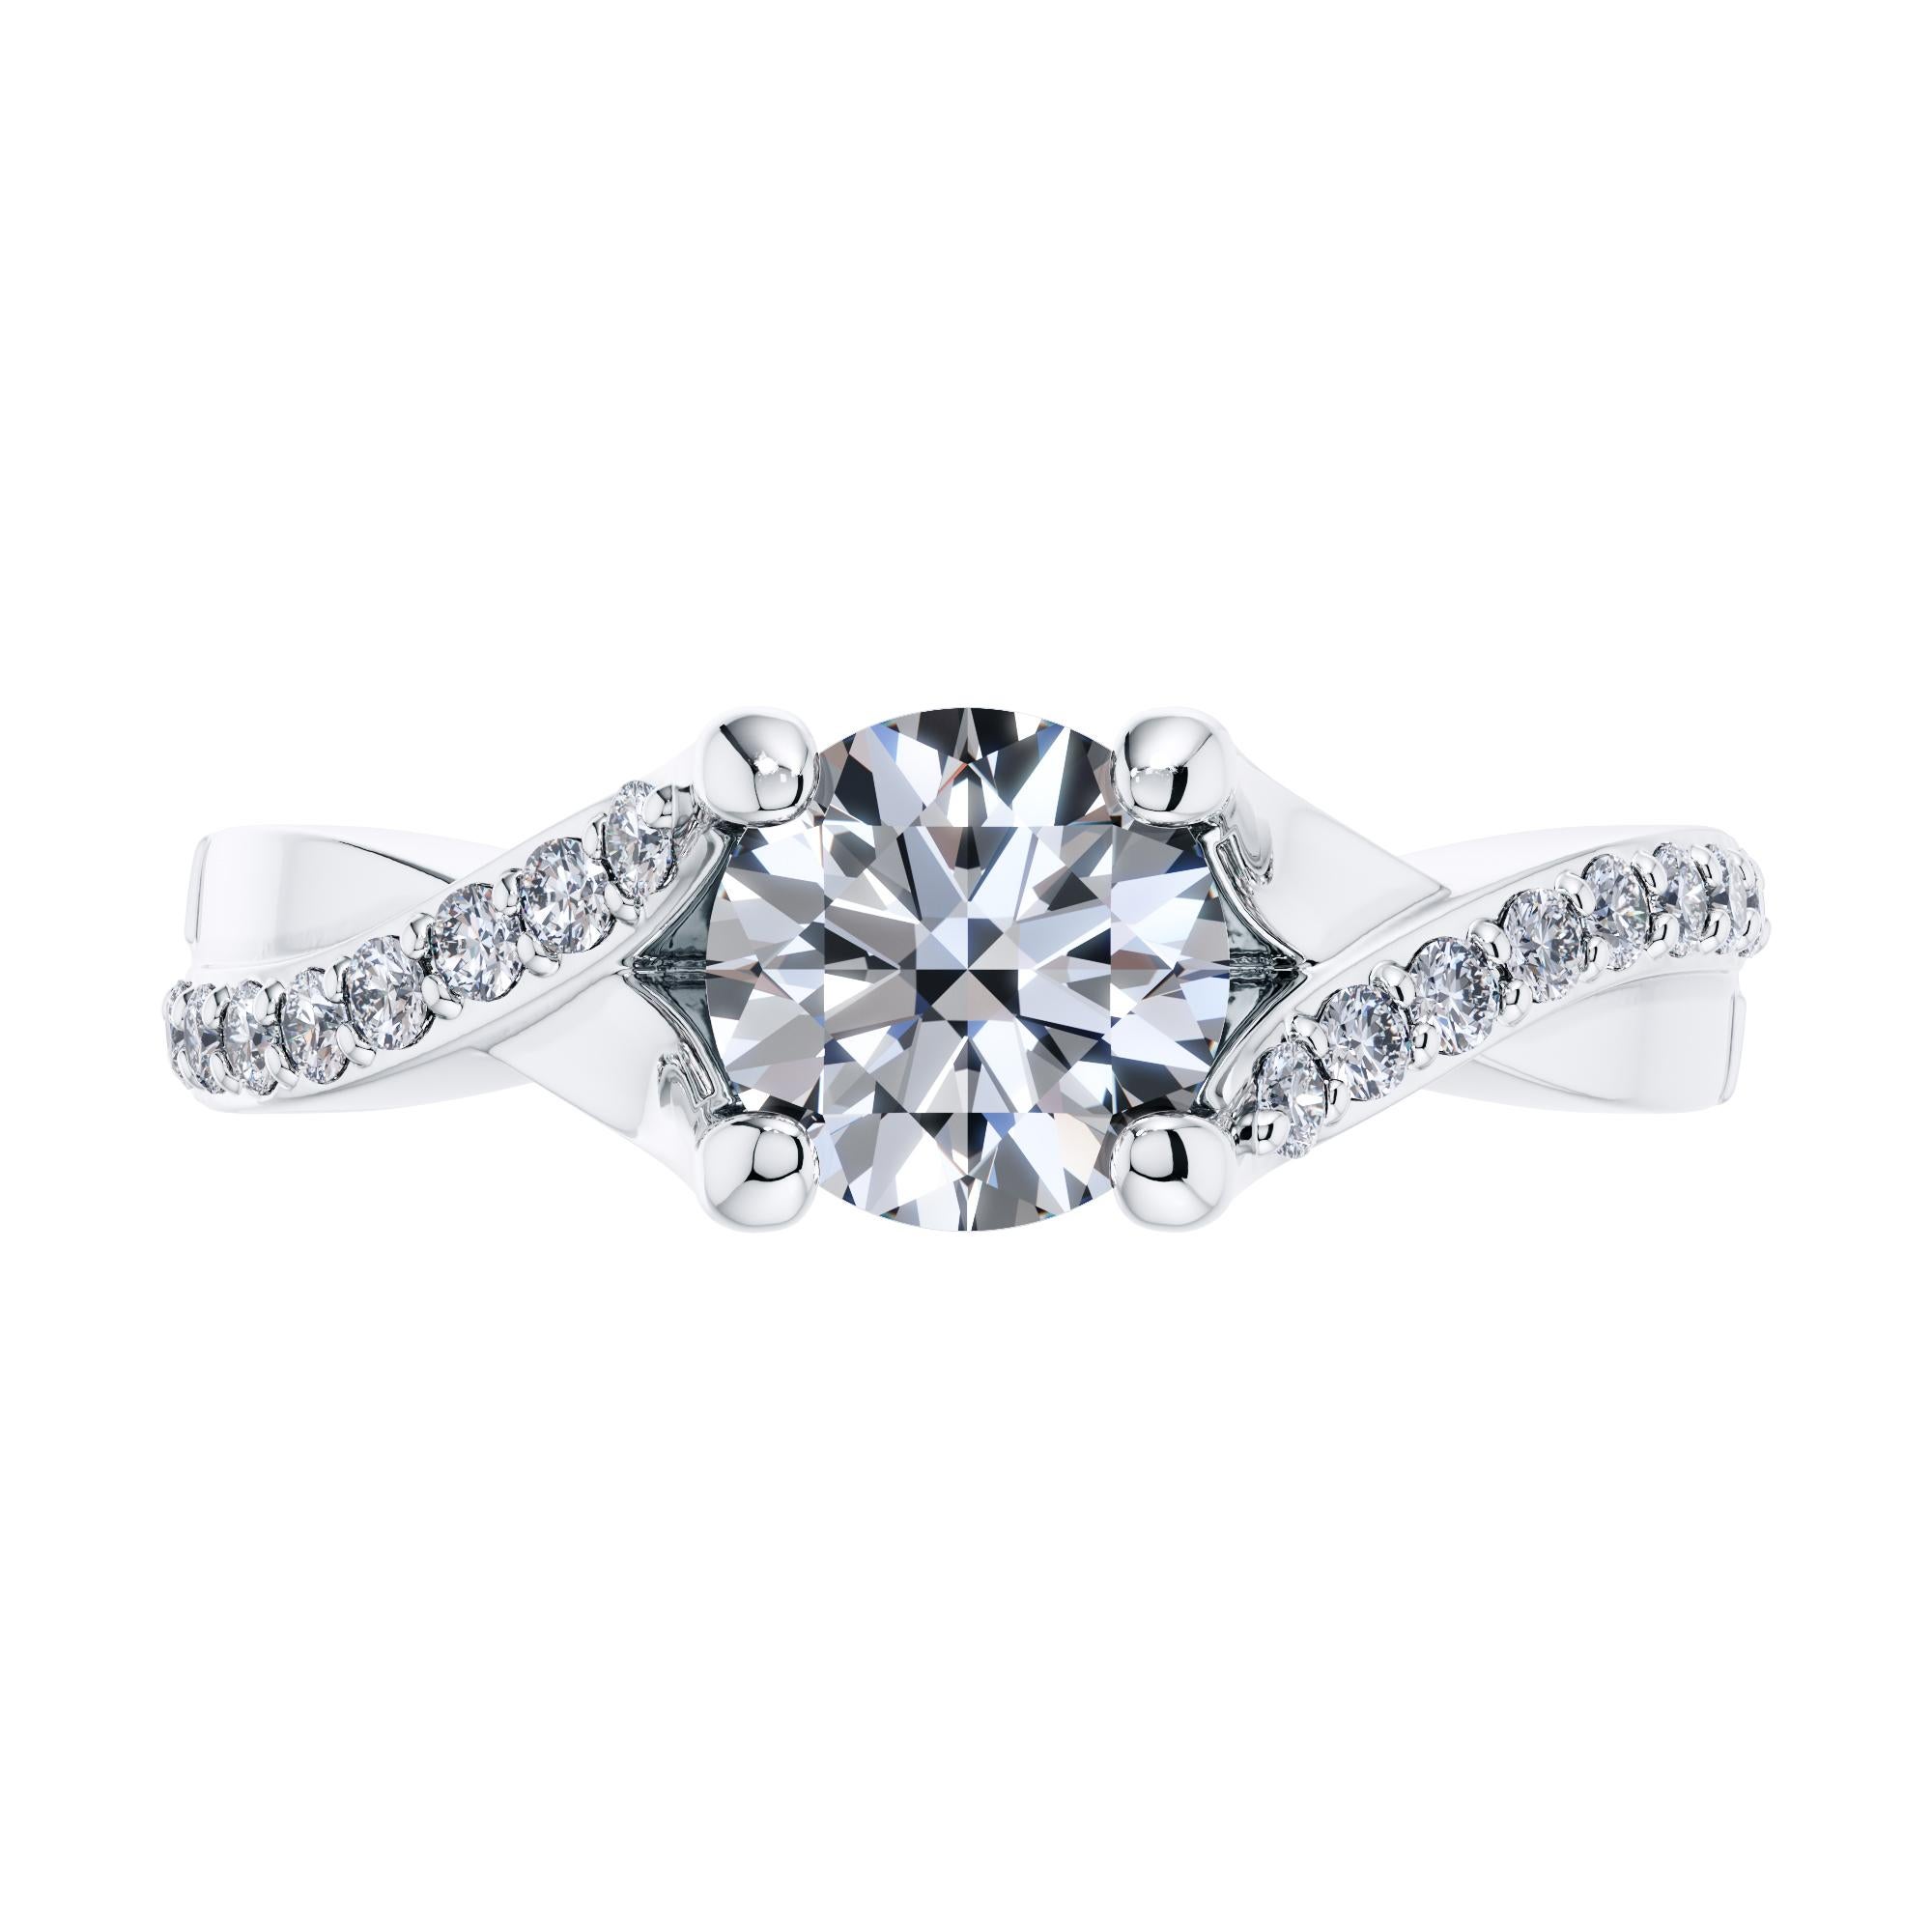 For a beautifully entwined journey together, this gleaming twisted vine modern classic engagement ring. Handmade in high grade Platinum 950 to British Standard, with a total of 0.50 Carat White Diamonds. Set in an open gallery 4 prong mount with a